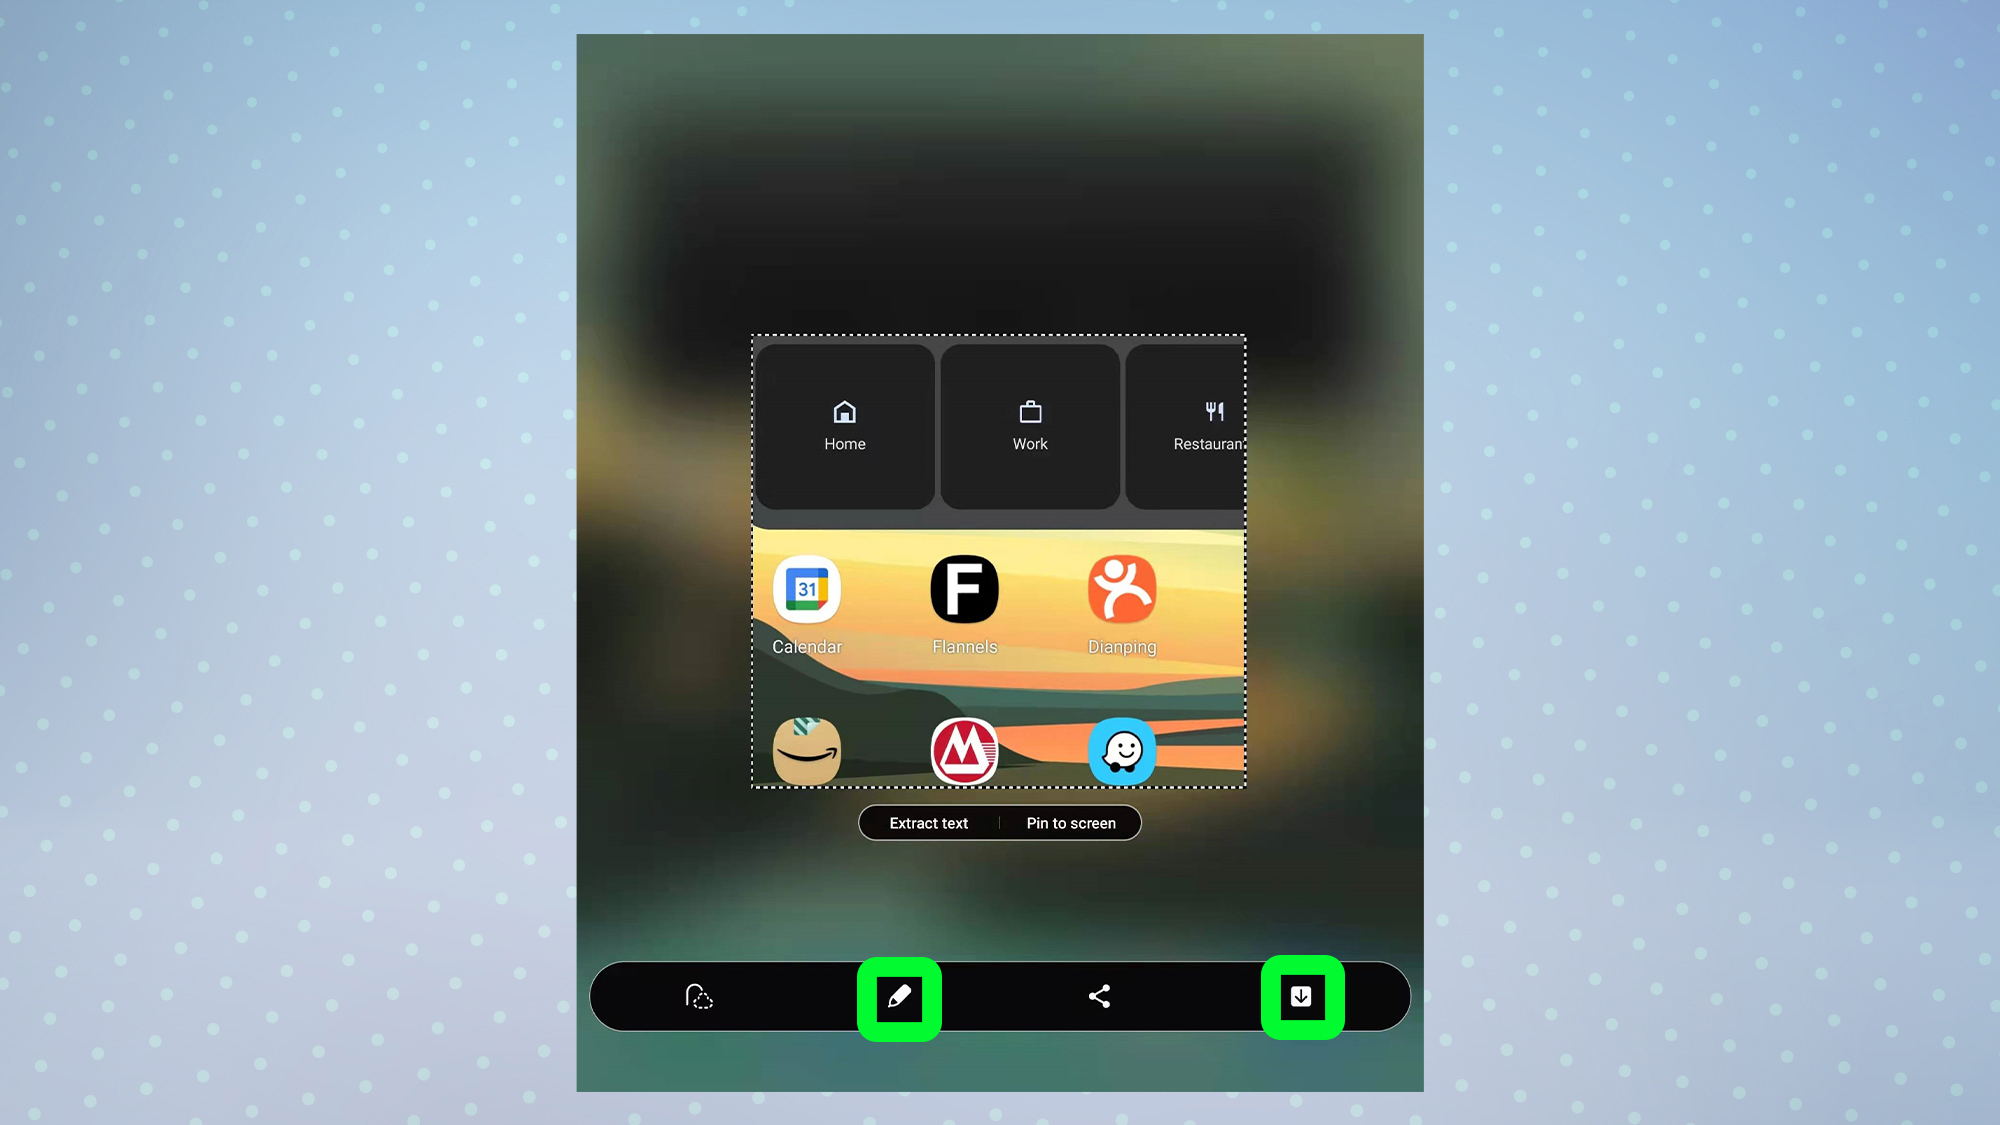 A screenshot from the Samsung Galaxy Z Fold 3 showing the save selection button highlighted